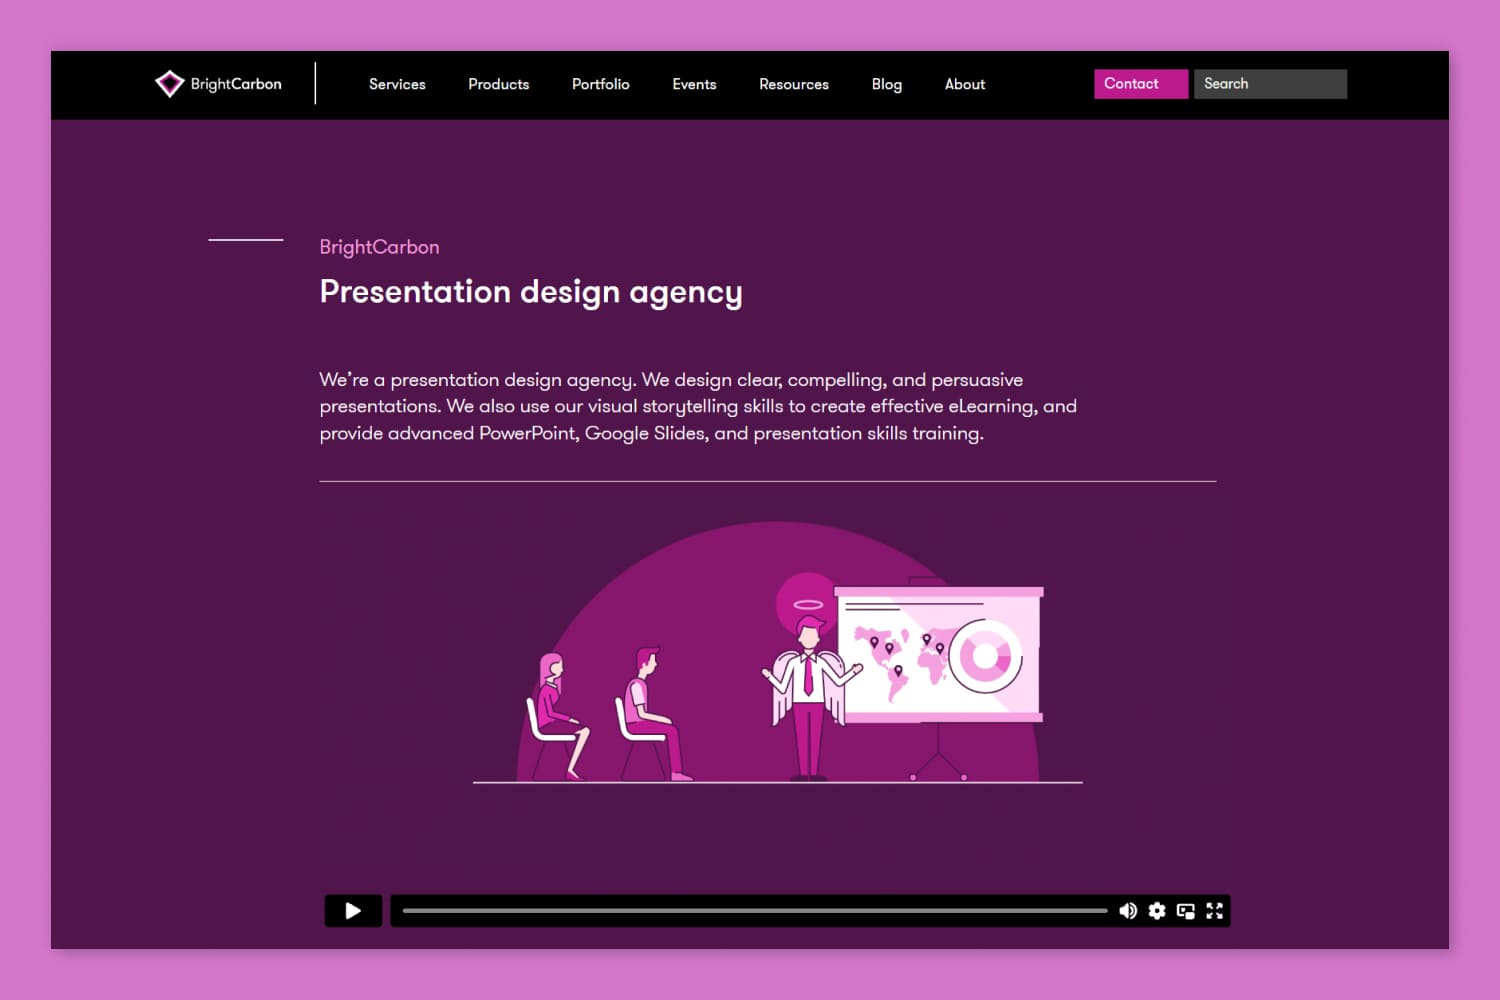 Screenshot of the main page of the site BrightCarbon.